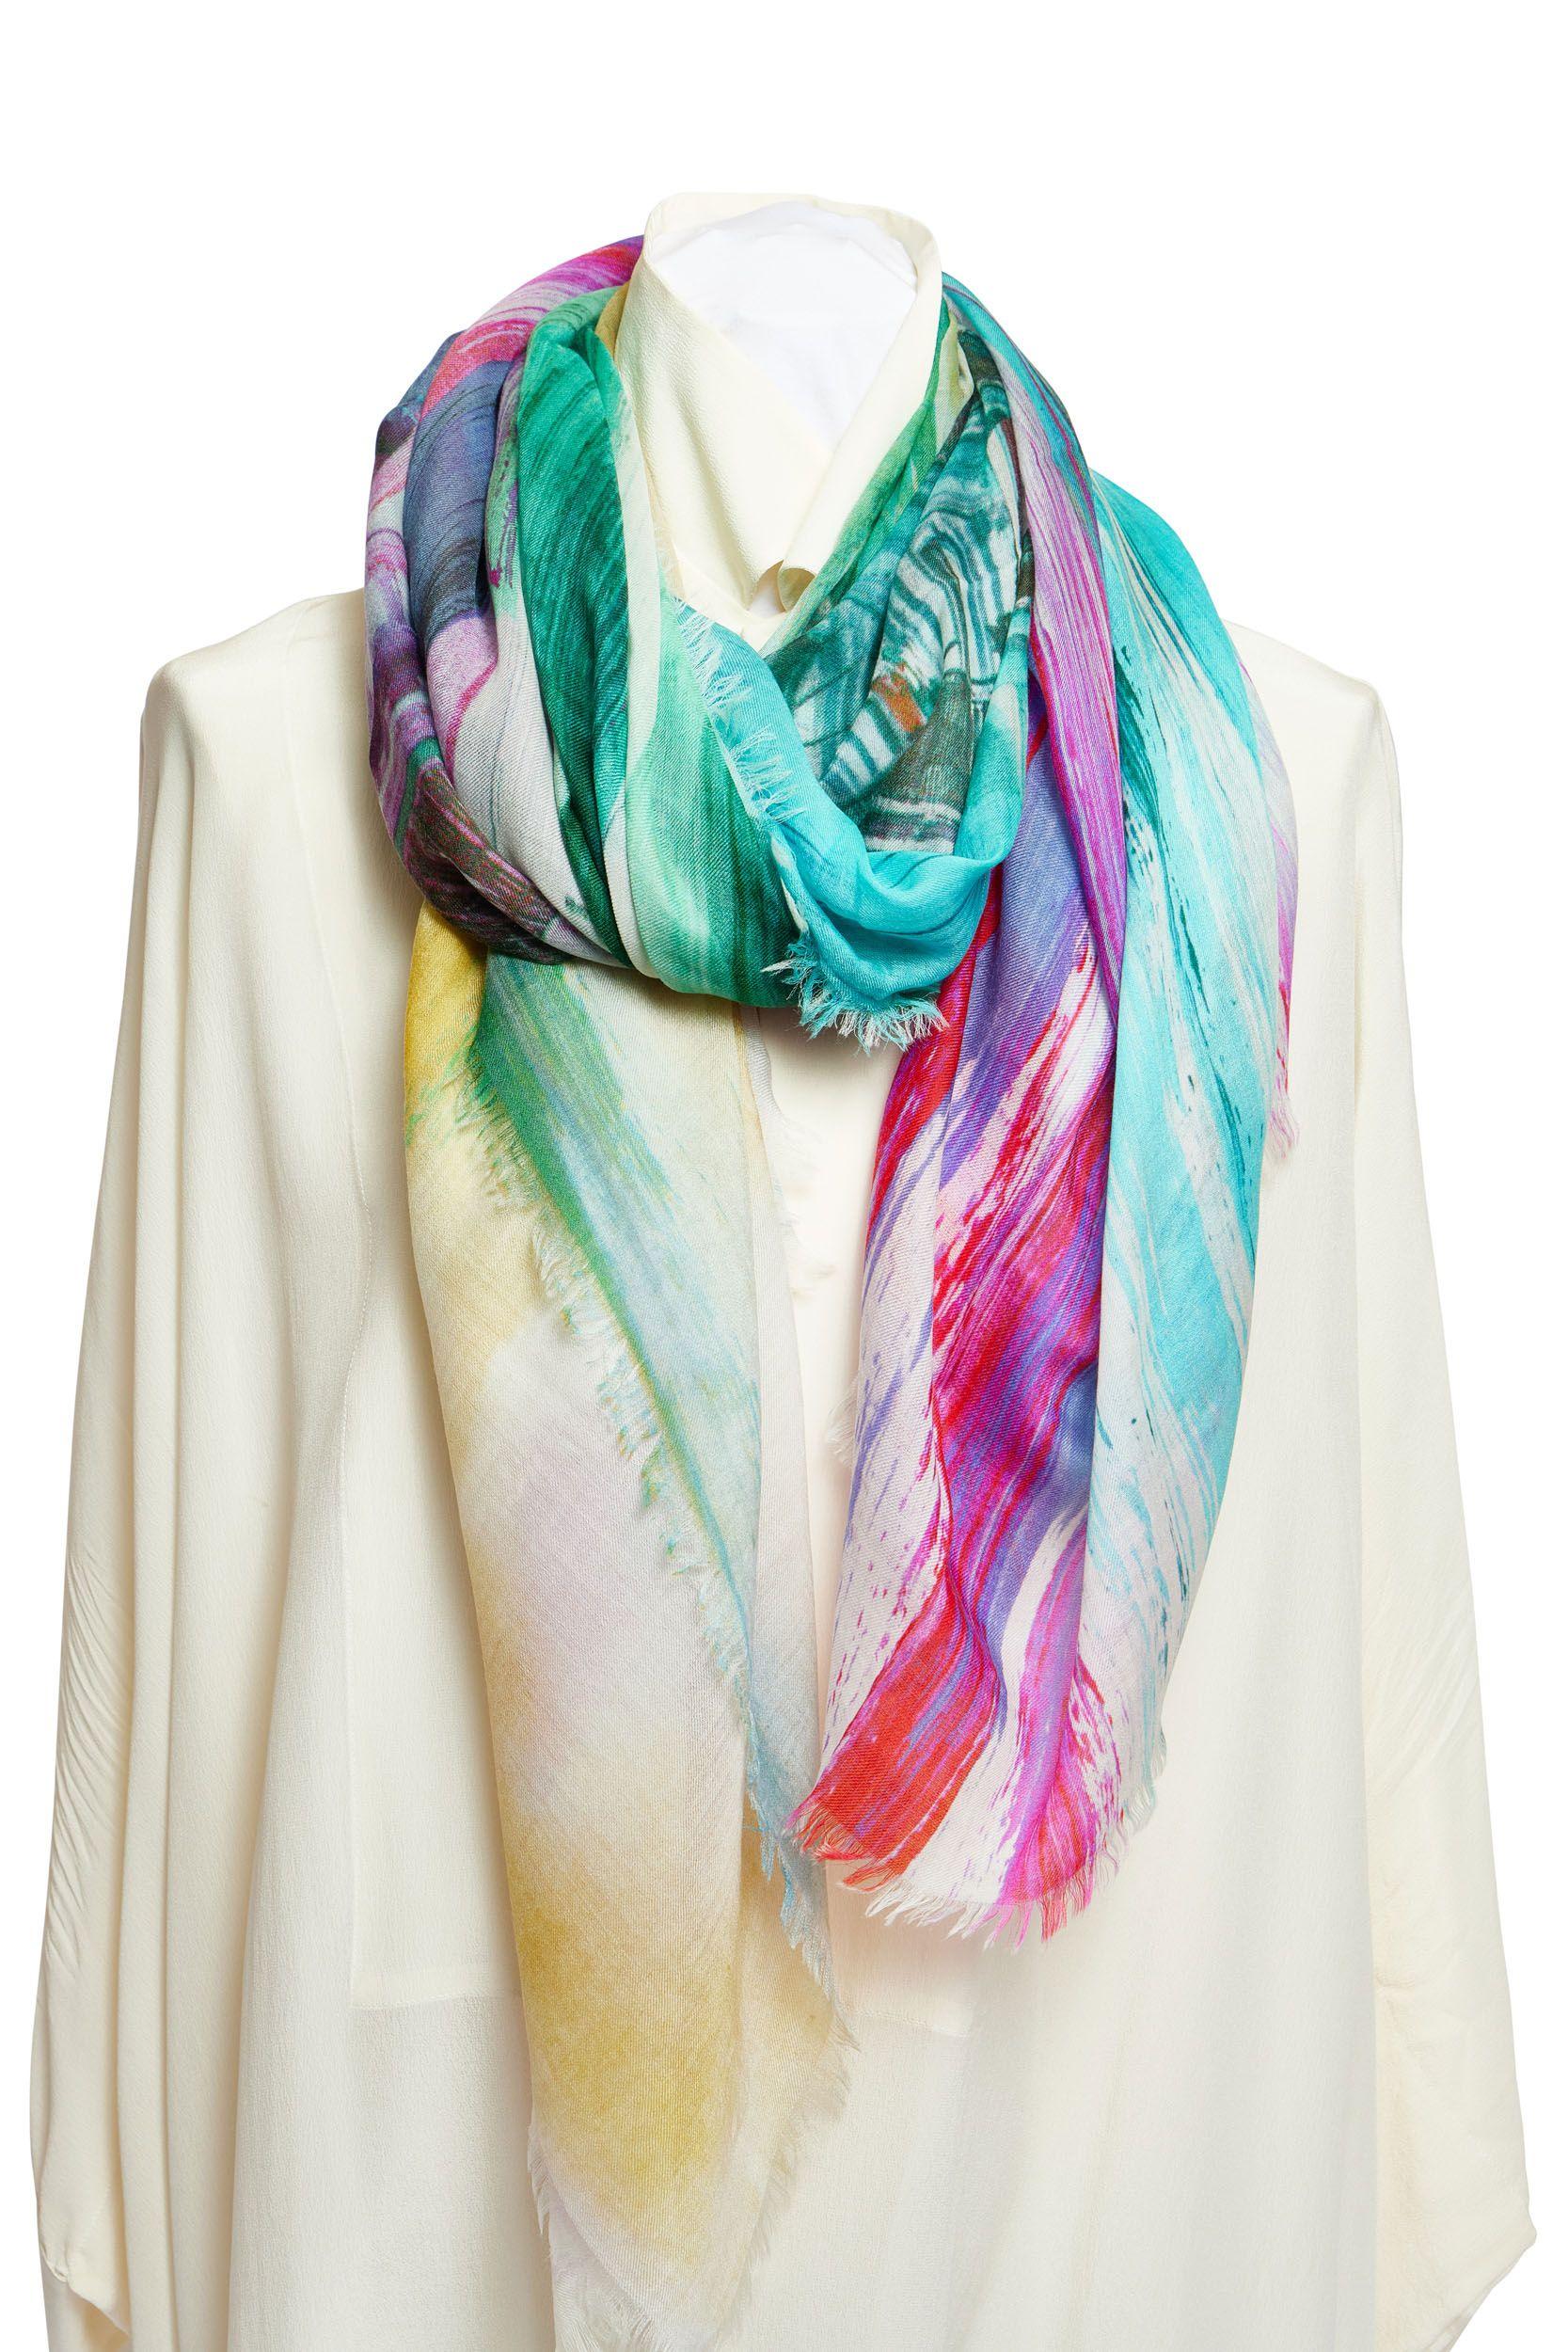 New Chanel watercolor scarf with a fringed trim. Coco cuba collection . The scarf shows a bridge pattern in different colors like pink green and blue. In one corner is a green CC logo. It is 100% cashmere and you can wear it as a scarf or just over